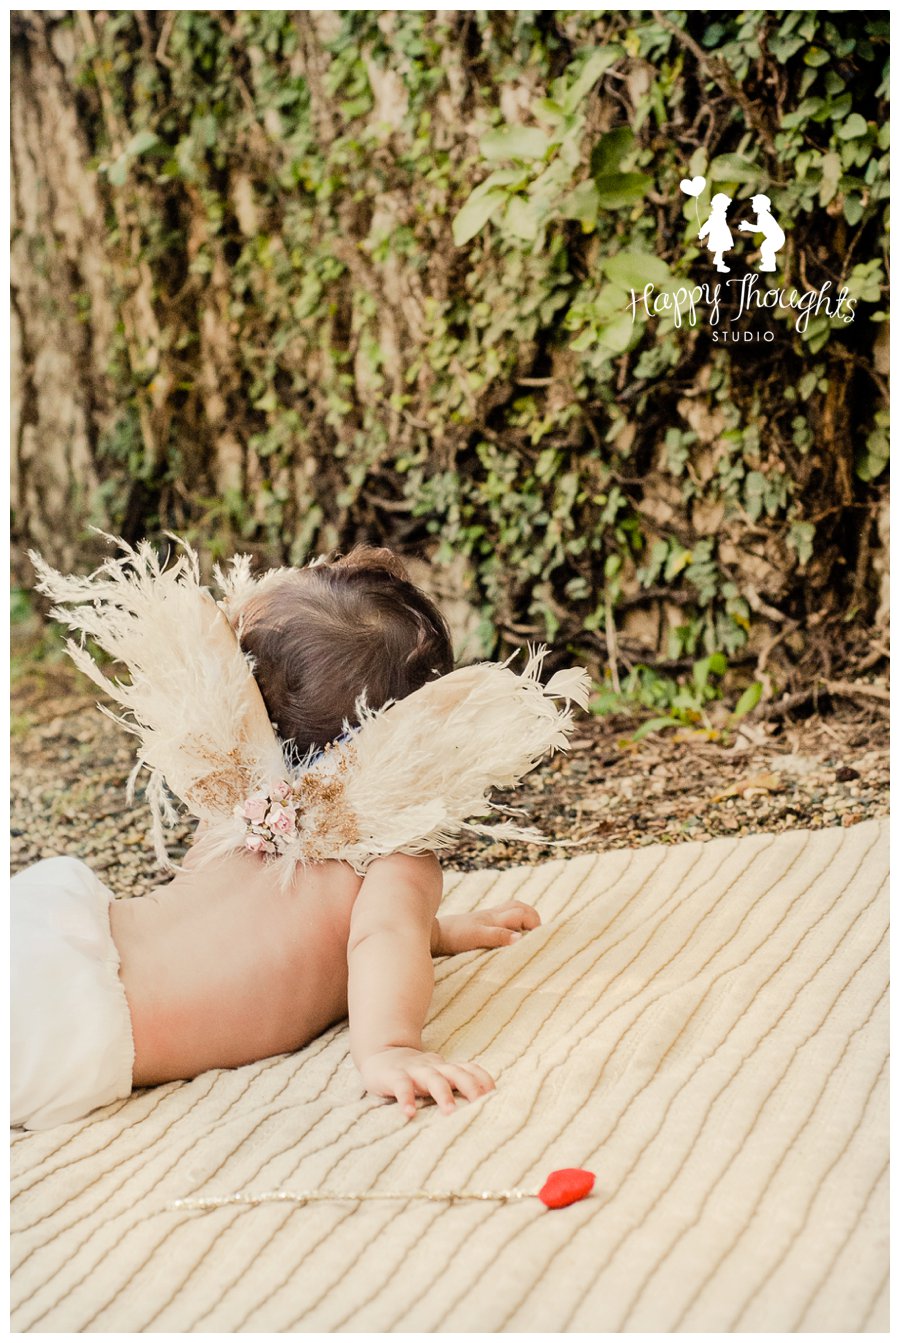 Valentine's Day Angels & Cupids Family and Children Photography in Puerto Rico